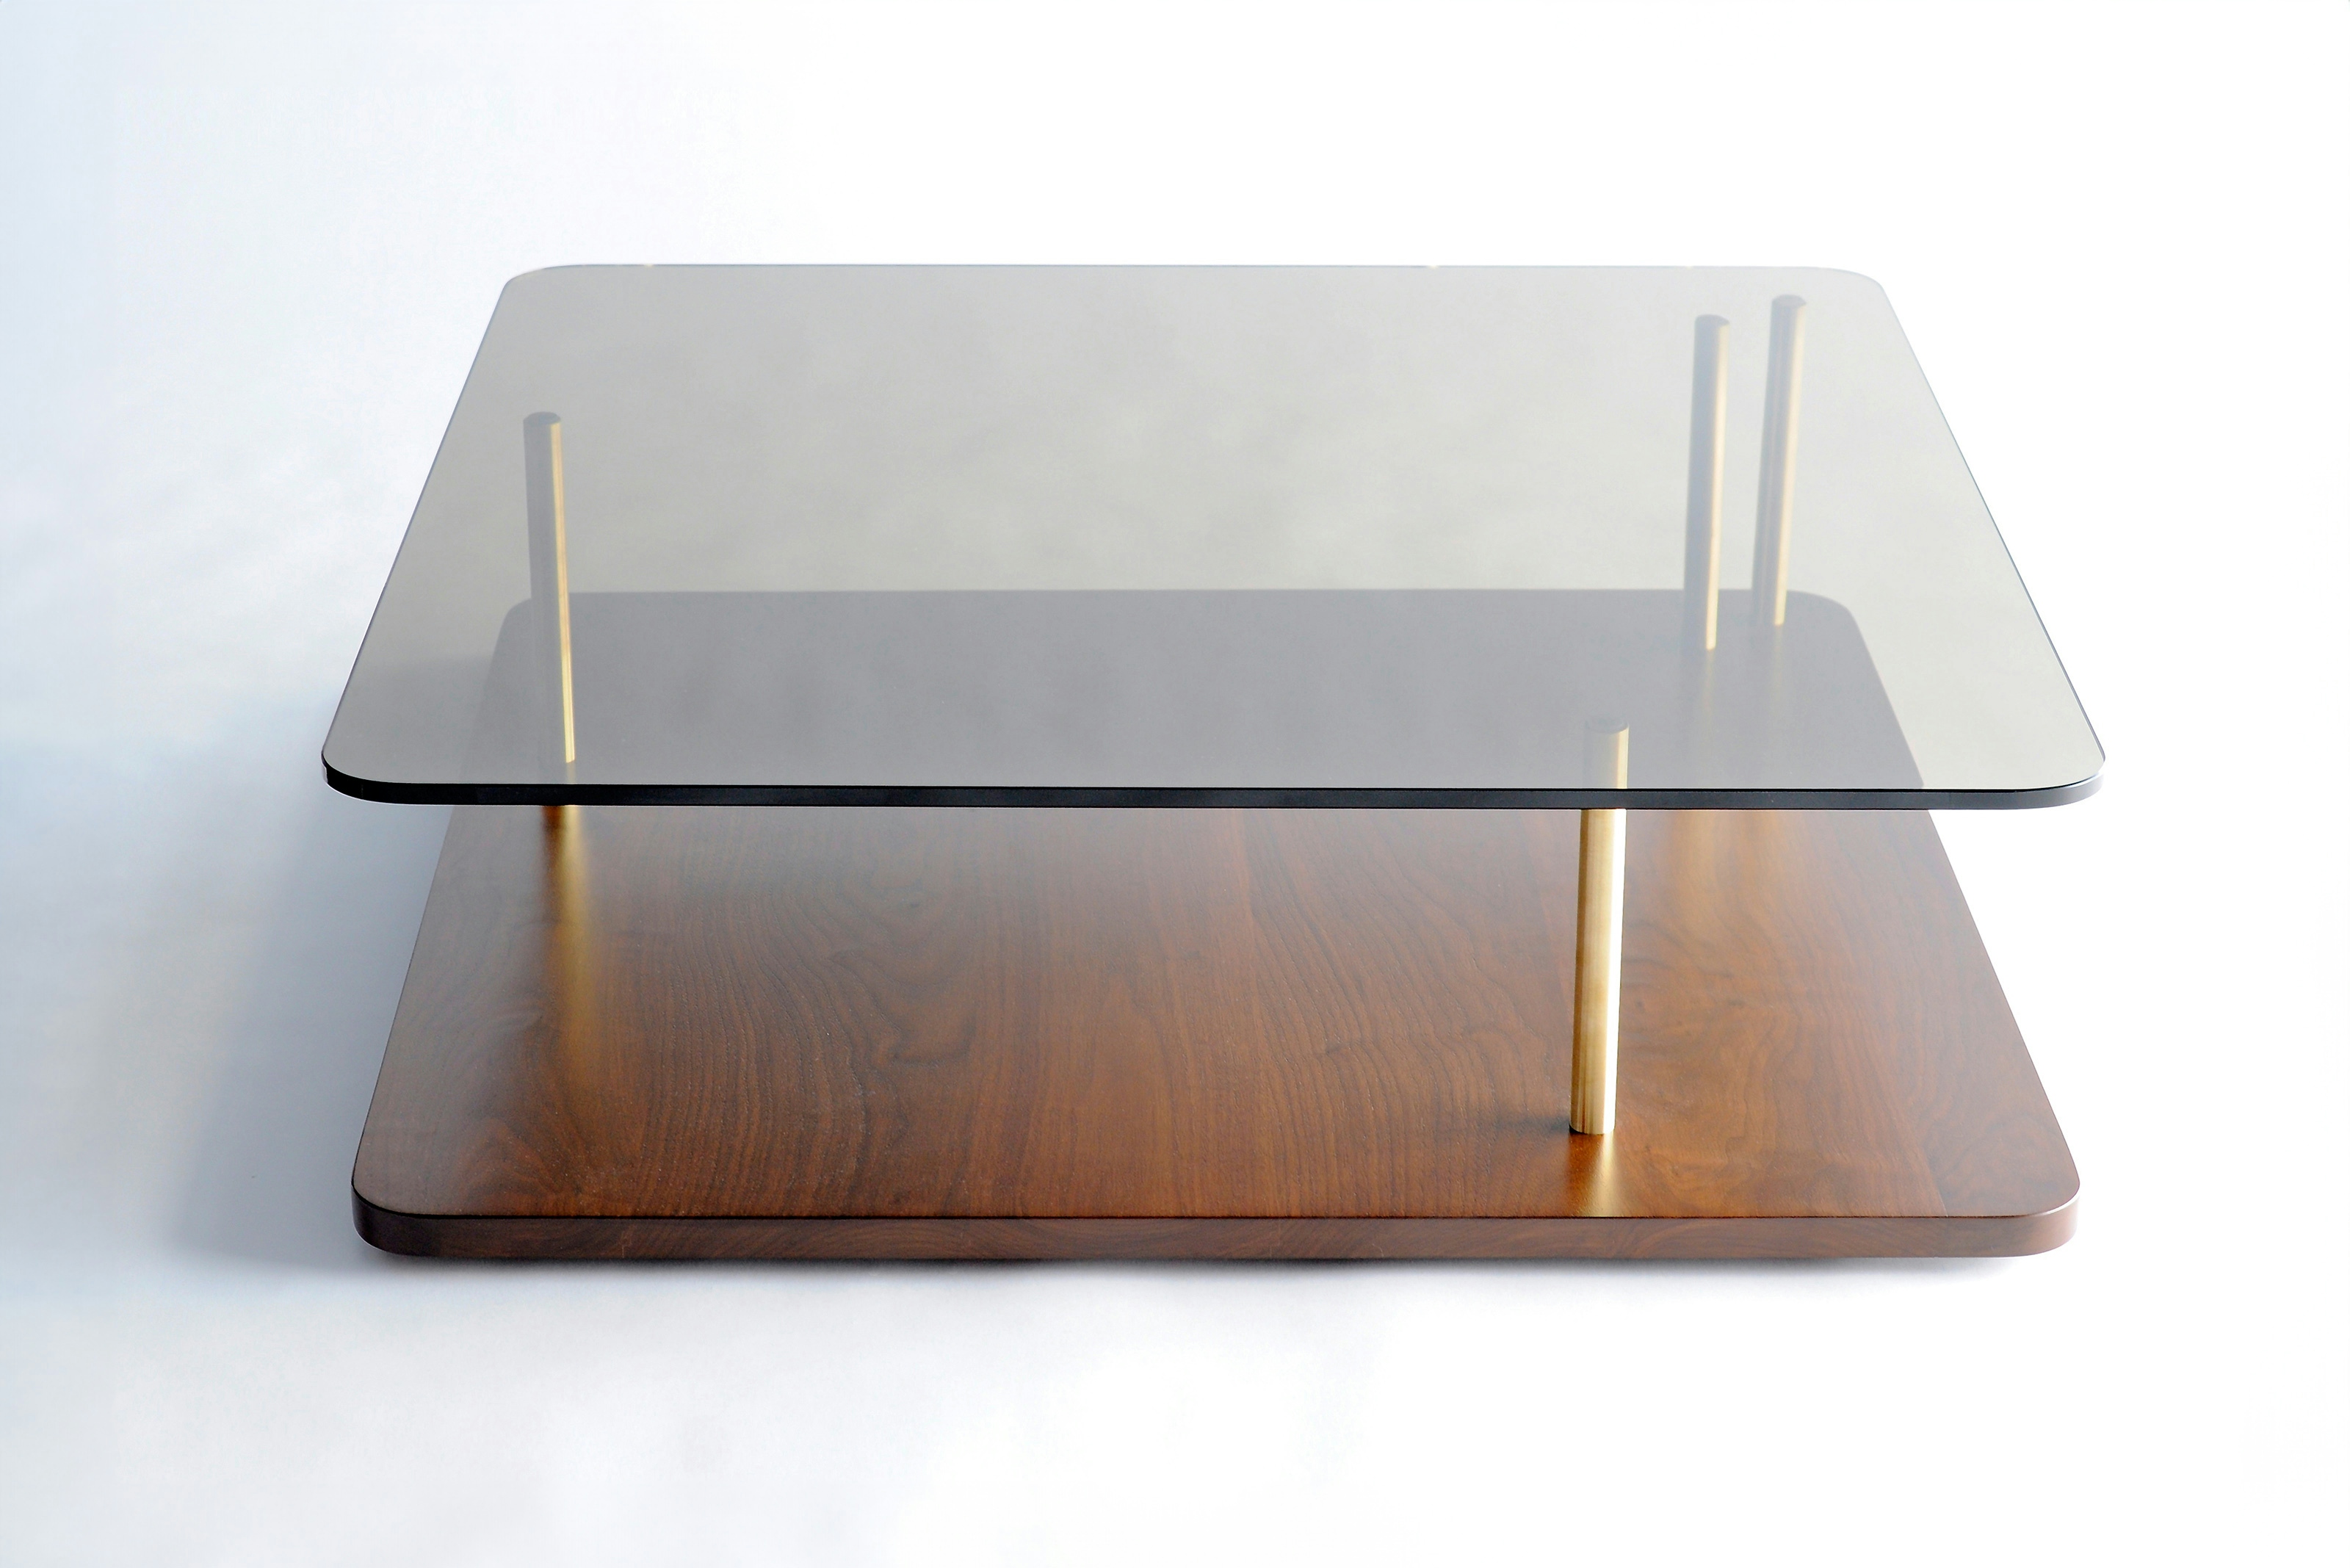 Phase Design Reza Feiz Points of Interest Wood Coffee Table 1 Product Page Web